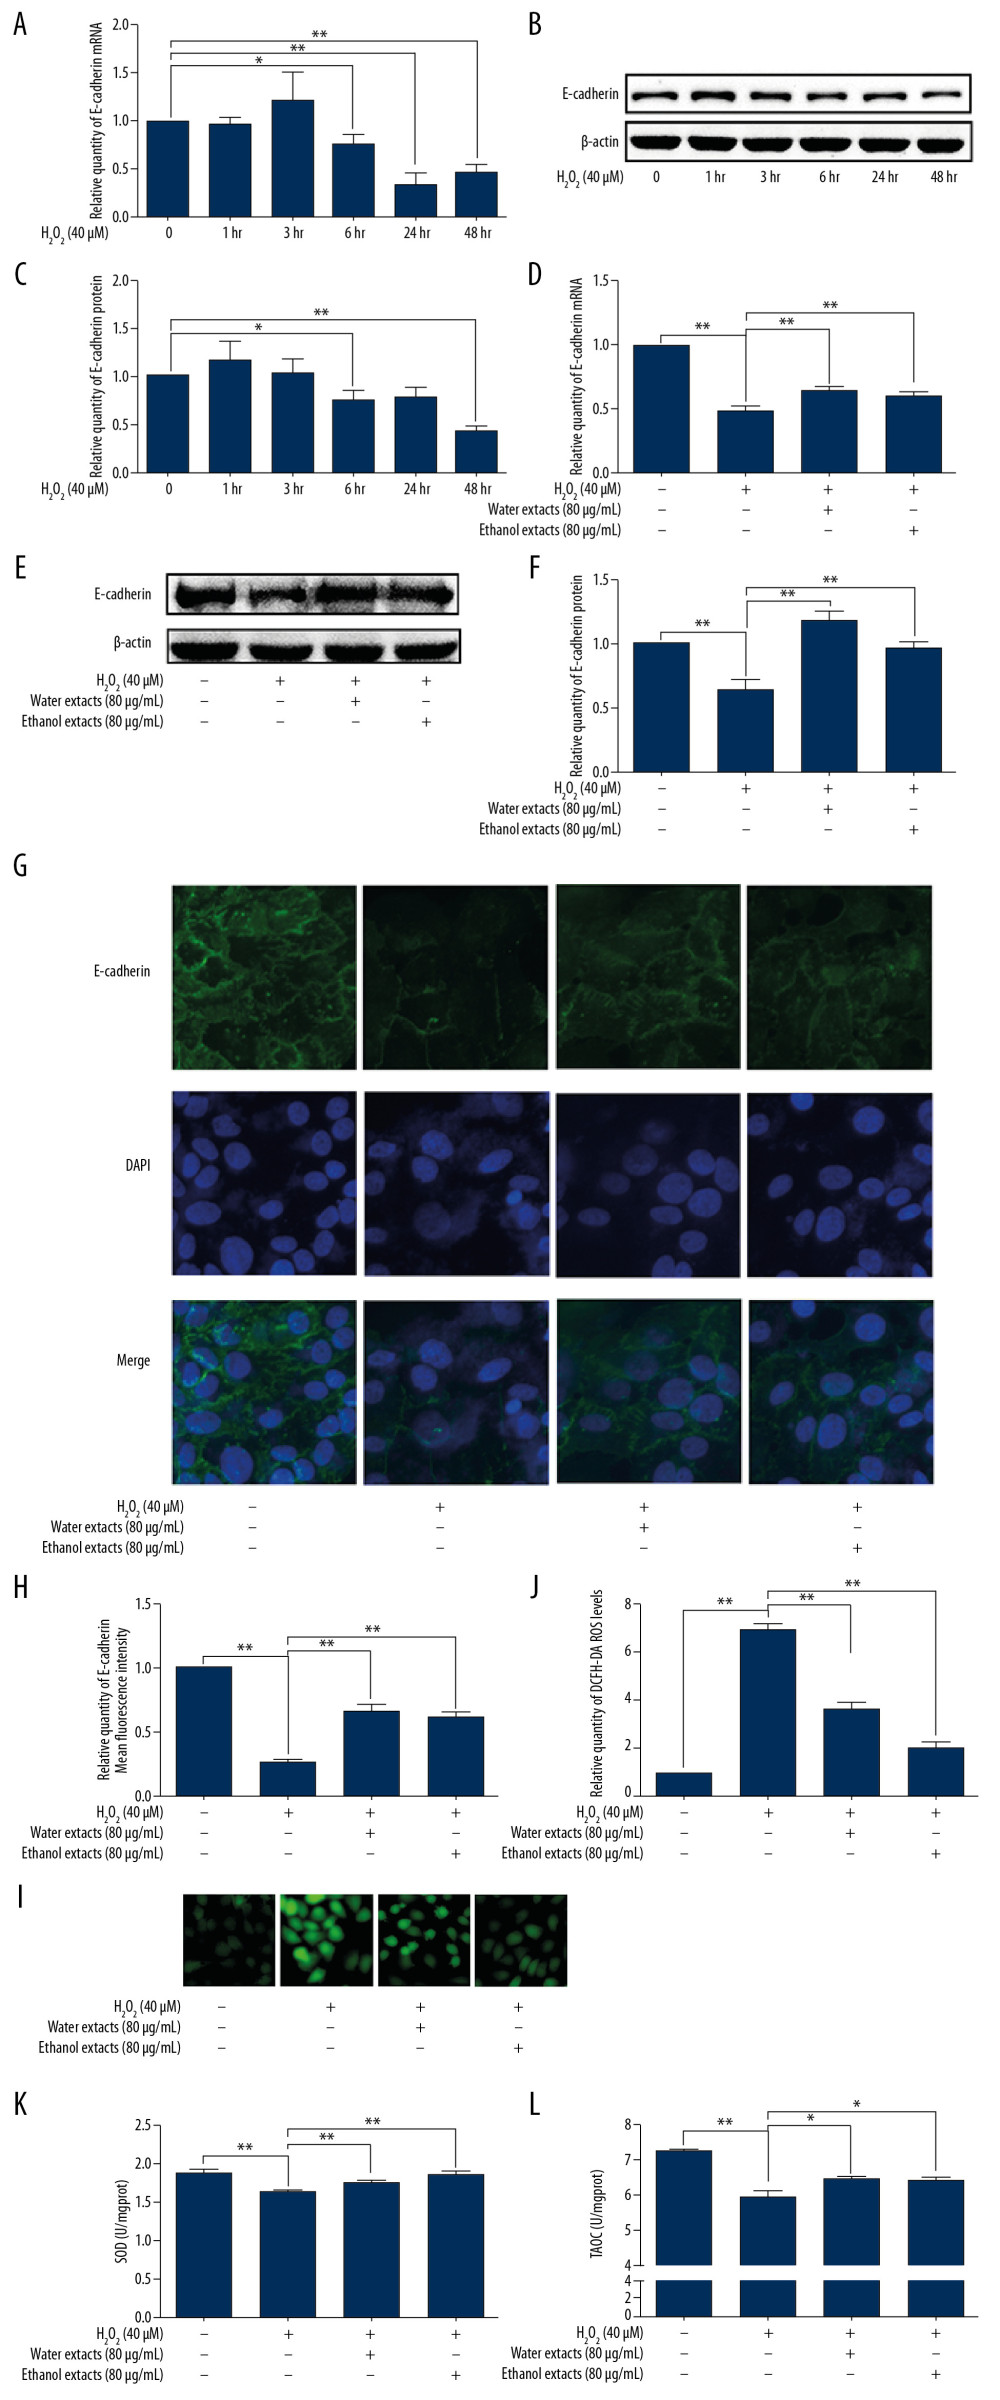 QXT extraction attenuated ROS-mediated E-cadherin downregulation in human lung epithelial cells. (A–C) Cultured 16HBE cells were incubated with H2O2 (40 μM) for different times. The expression level of E-cadherin was determined via qPCR (n=3, A) and Western blotting (n=3, B, C). (D–L) Cultured 16HBE cells were incubated with H2O2 or treated with H2O2 (40 μM) plus the water or ethanol extract from QXT (80 μg/mL) for 48 h or 72 h. The expression level of E-cadherin was determined via qPCR (n=3, D), Western blotting (n=3, E, F), and immunofluorescence (n=3, G, H). ROS level was determined via DCFH-DA and observed with a fluorescence microscope (n=3, I, J). The levels of SOD and TAOC were detected by colorimetry (n=3, K, L). The protein levels of E-cadherin were quantified by using Image J software and normalized to β-actin. Data are shown as the mean±standard, * P<0.05, ** P<0.01.